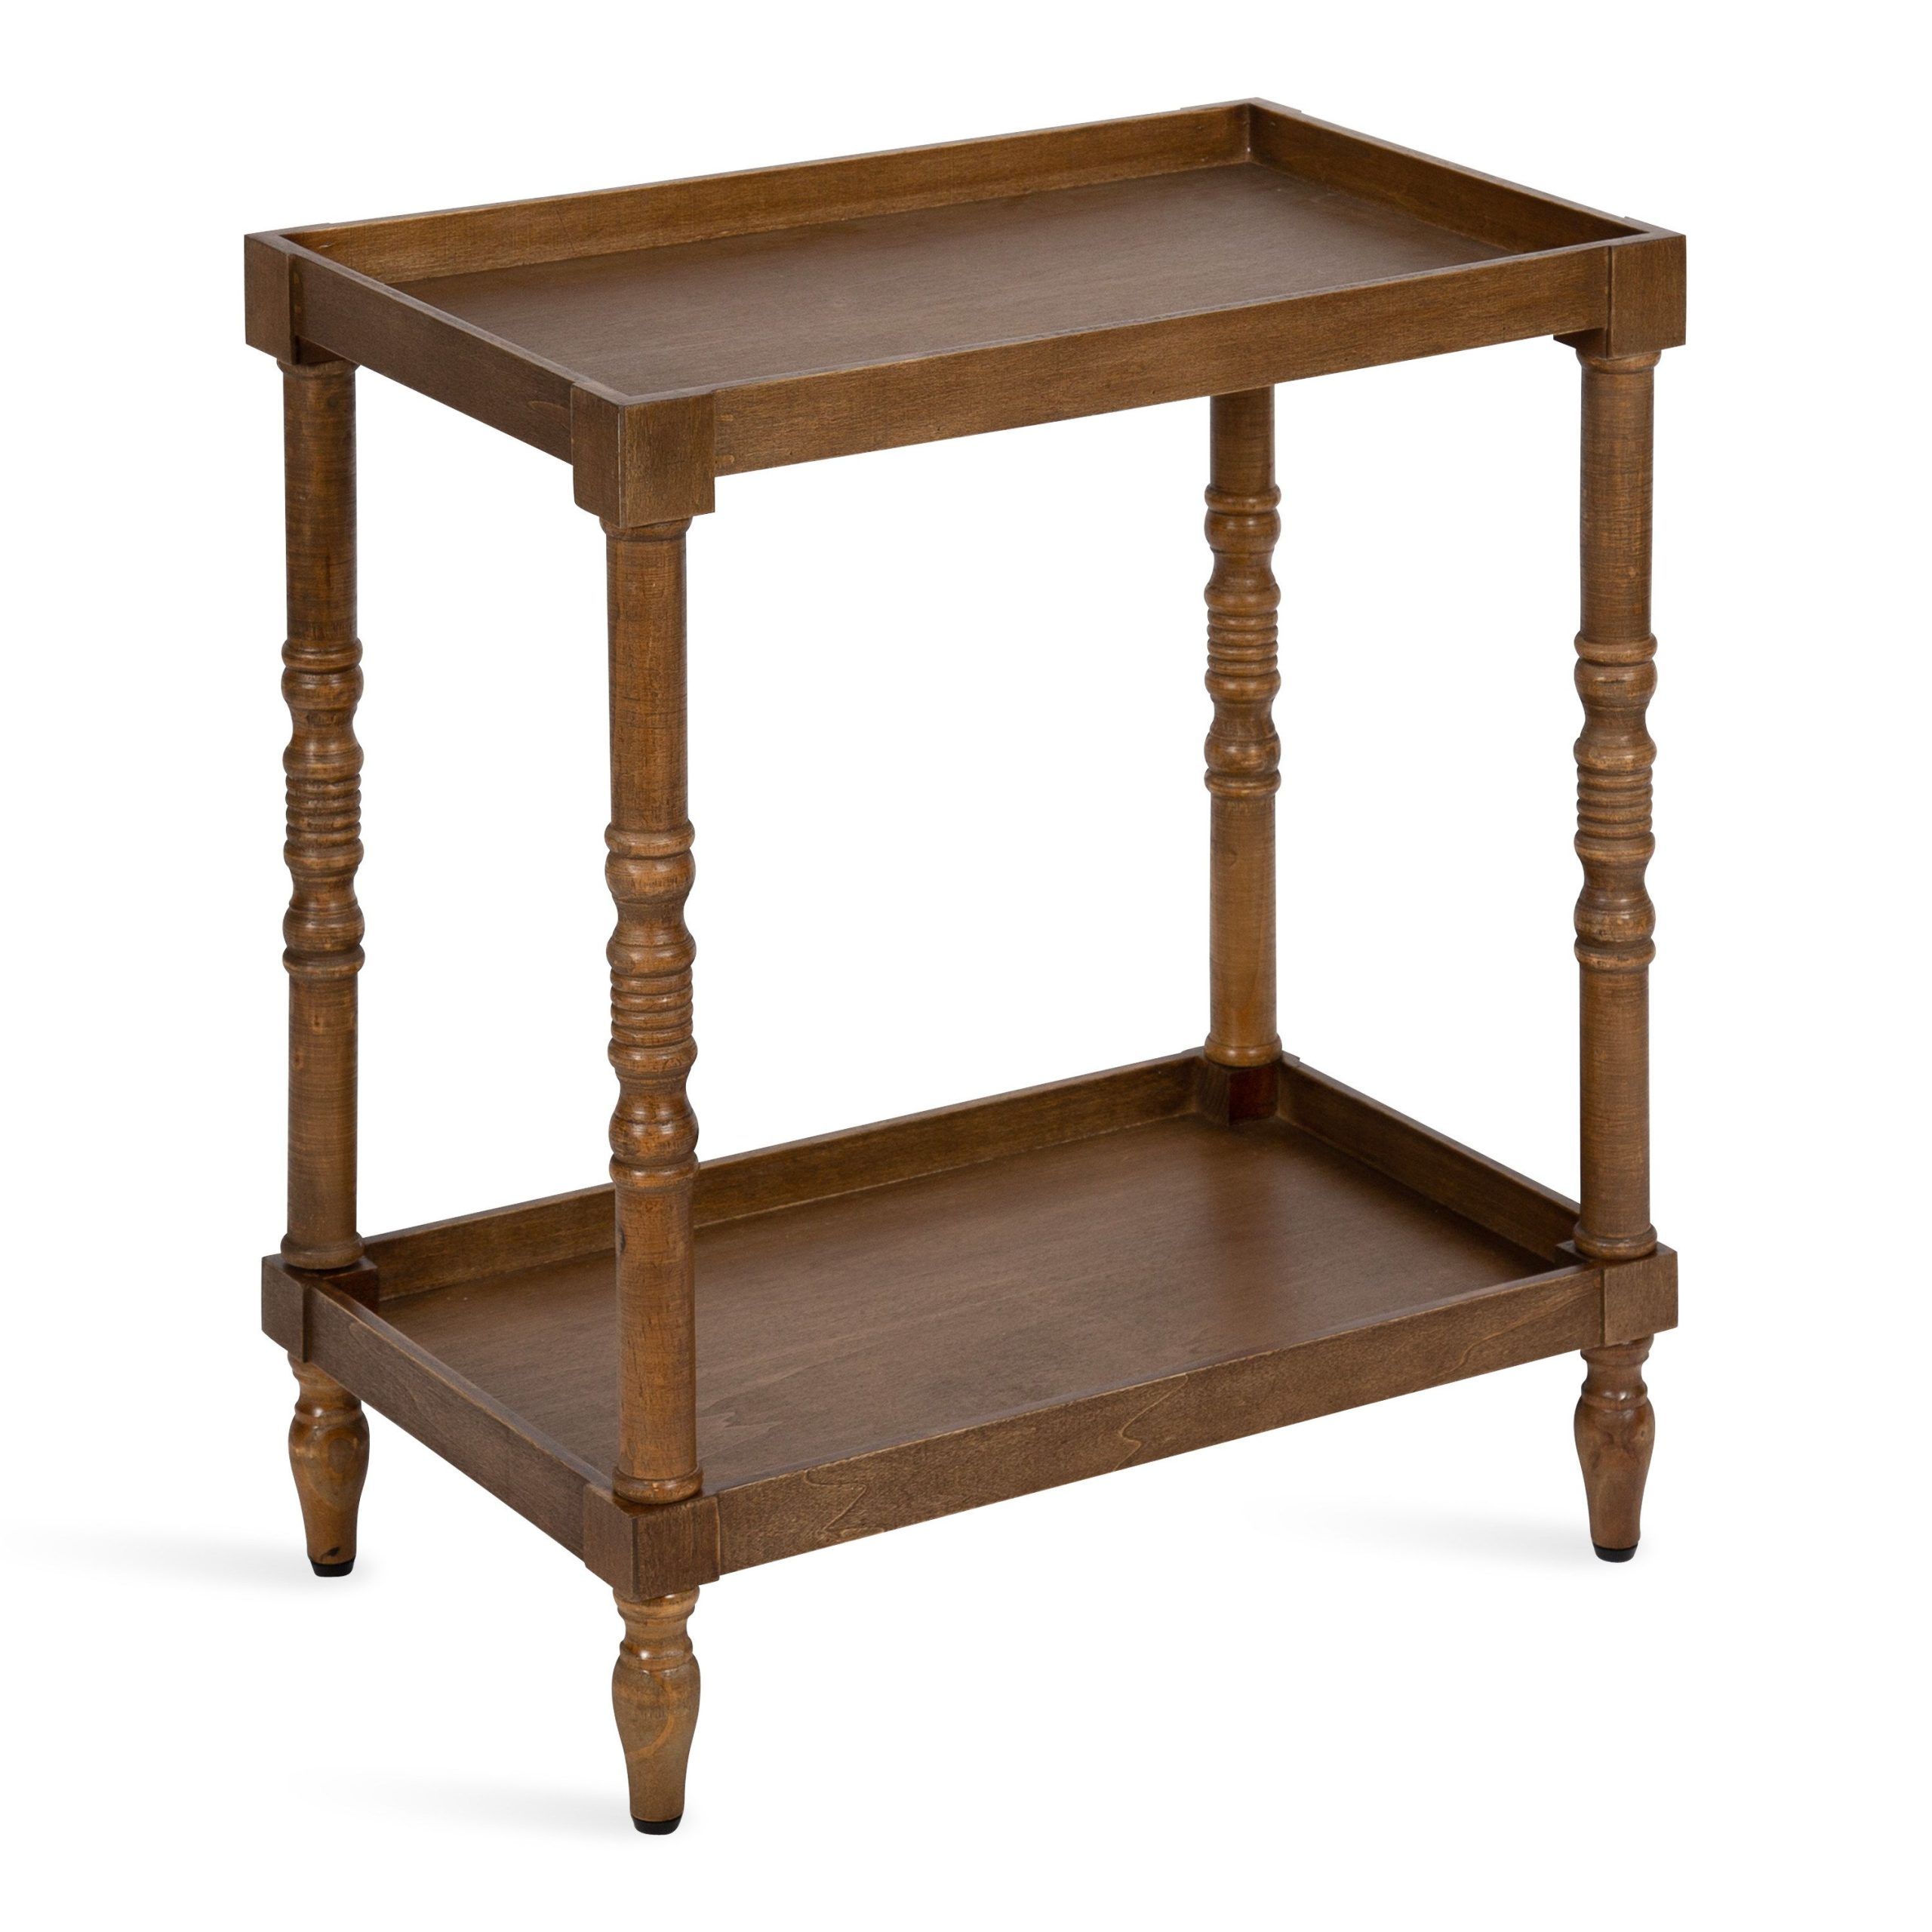 Kate And Laurel Bellport Farmhouse Side Table, 22 X 14 X 26, Rustic Regarding Kate And Laurel Bellport Farmhouse Drink Tables (View 11 of 20)